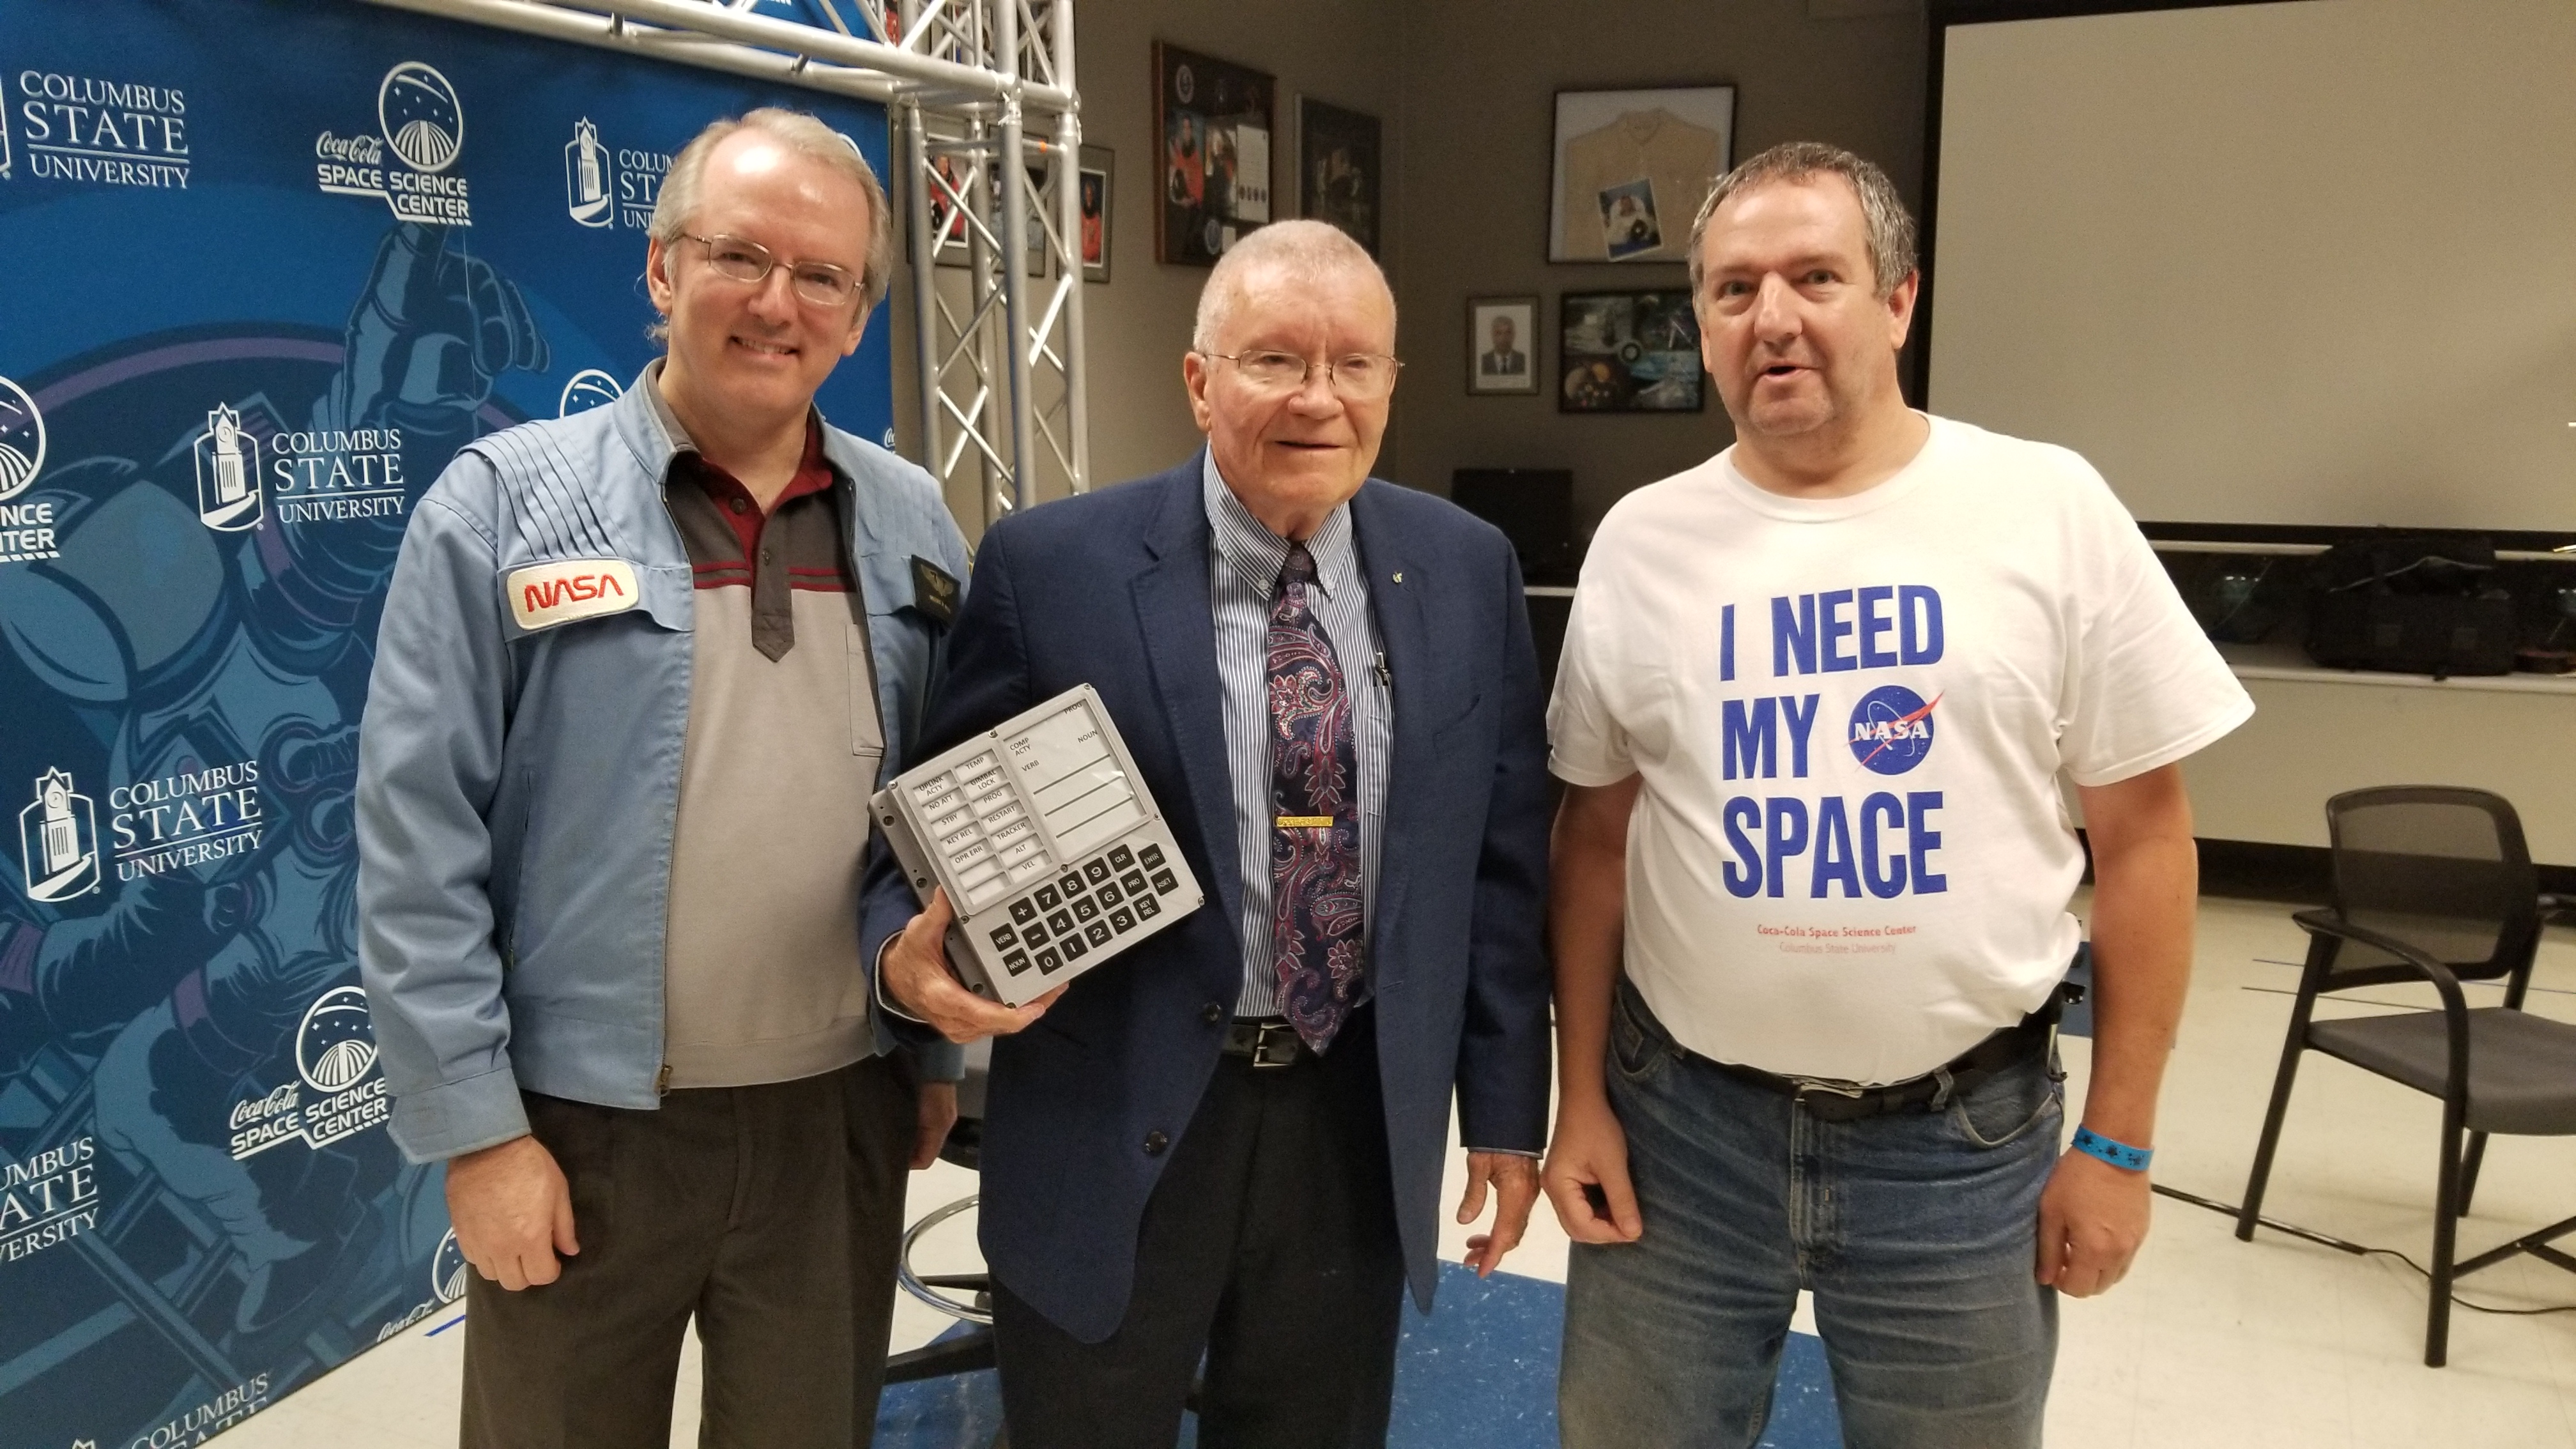 Meeting Fred Haise